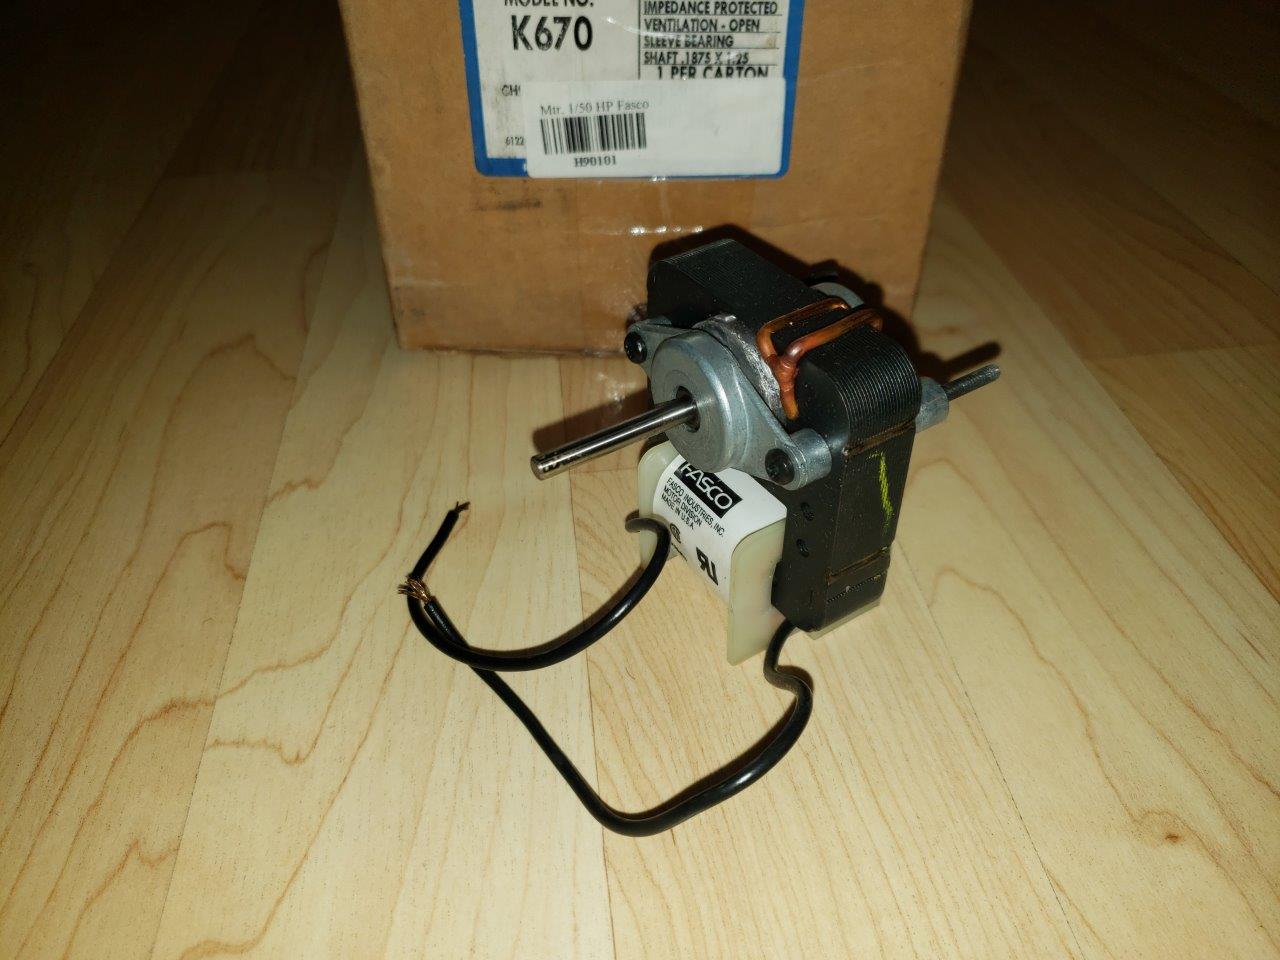 1/150 HP, 120 Volts, 3000 RPM, Fasco K670 C-Frame Motor, 1 Speed, 0.61 Amps, For Vent Fan OAO Enclosure, CCWSE Rotation, Sleeve Bearing 